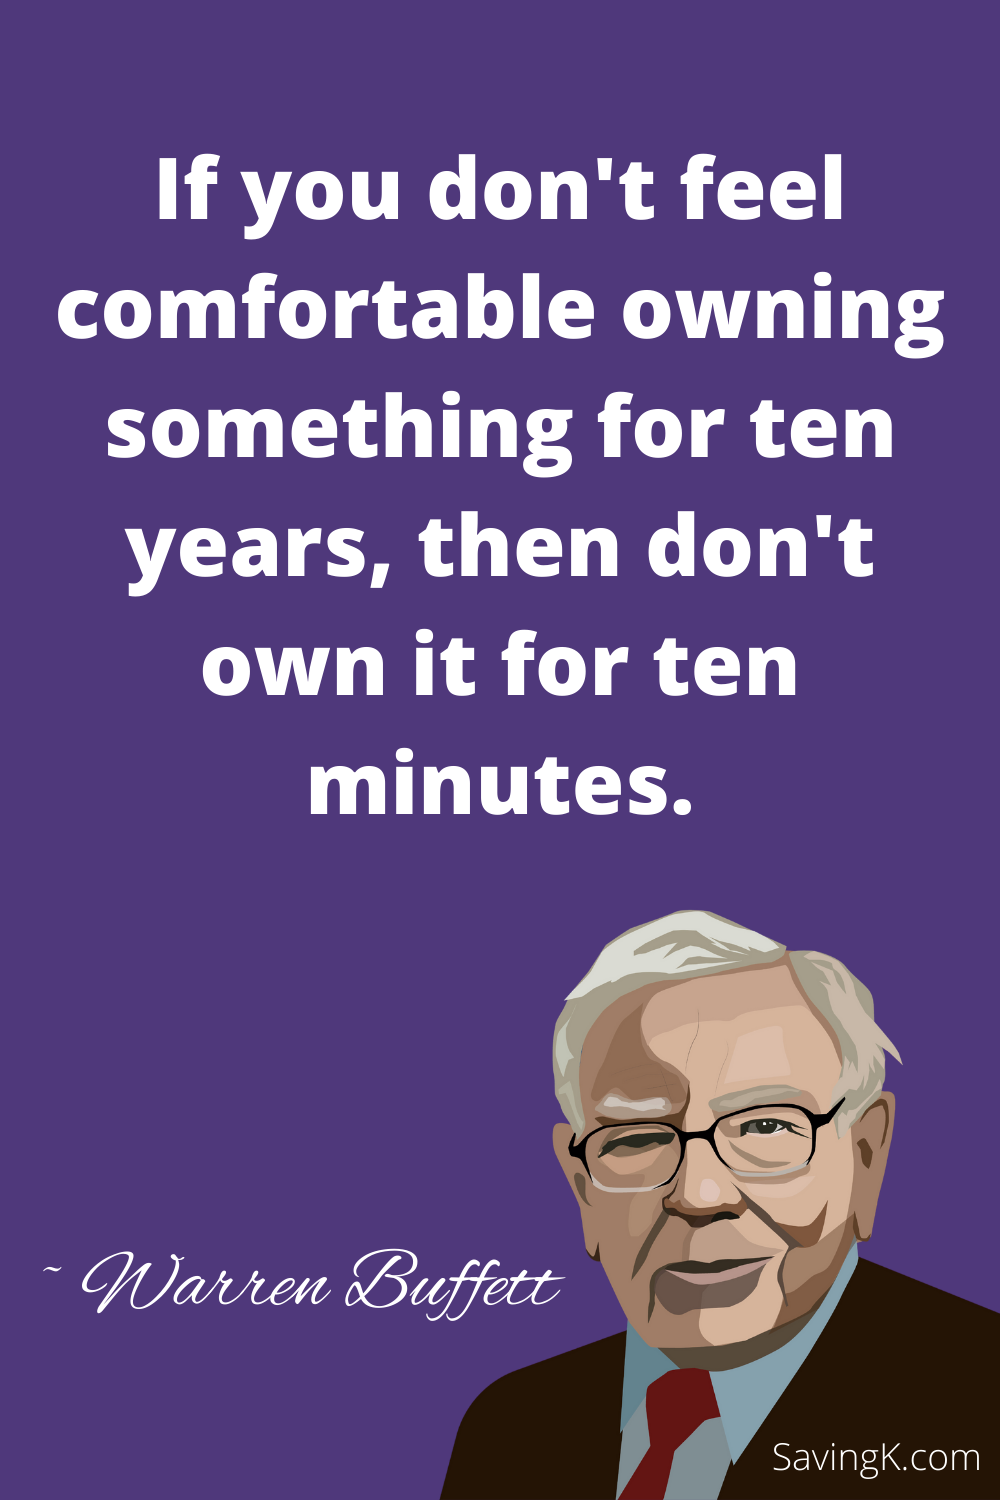 If you don't feel comfortable owning something for ten years, then don't own it for ten minutes.